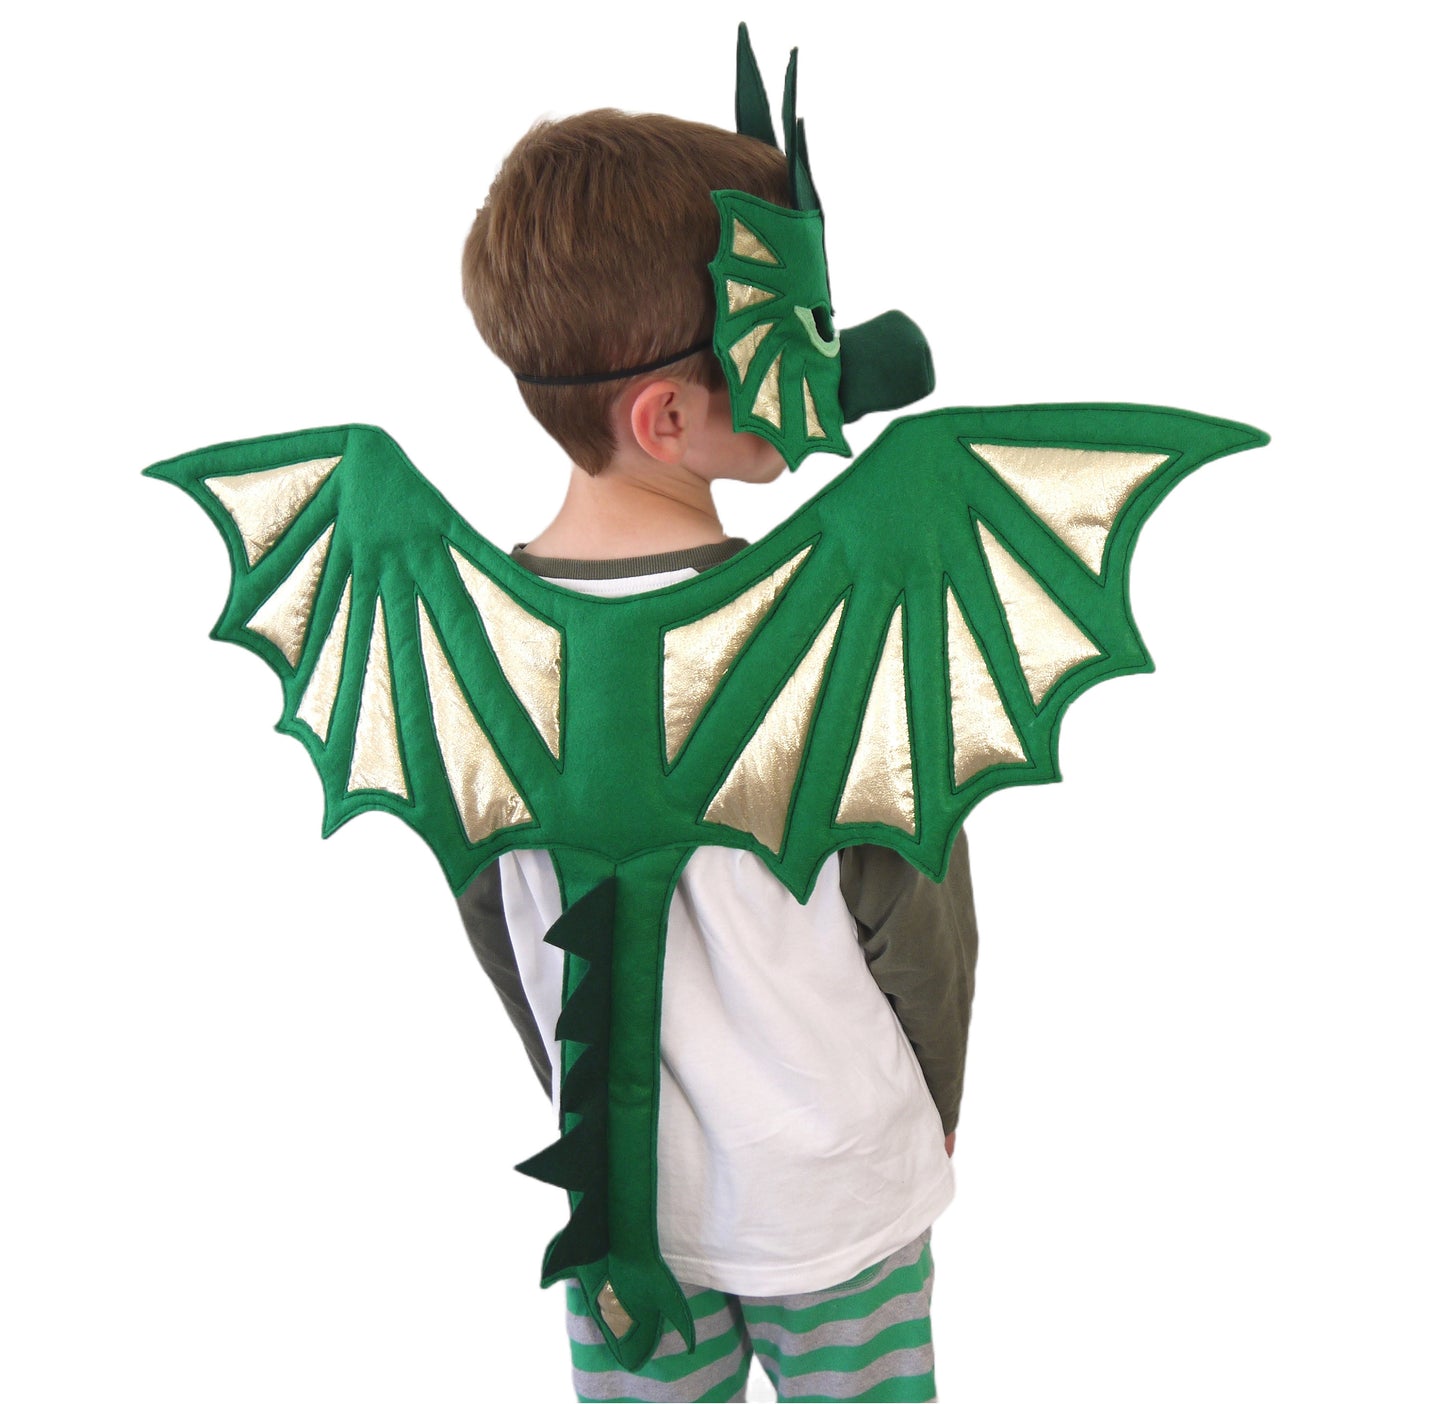 Green Dragon costume wings and mask Children's and Adult Size